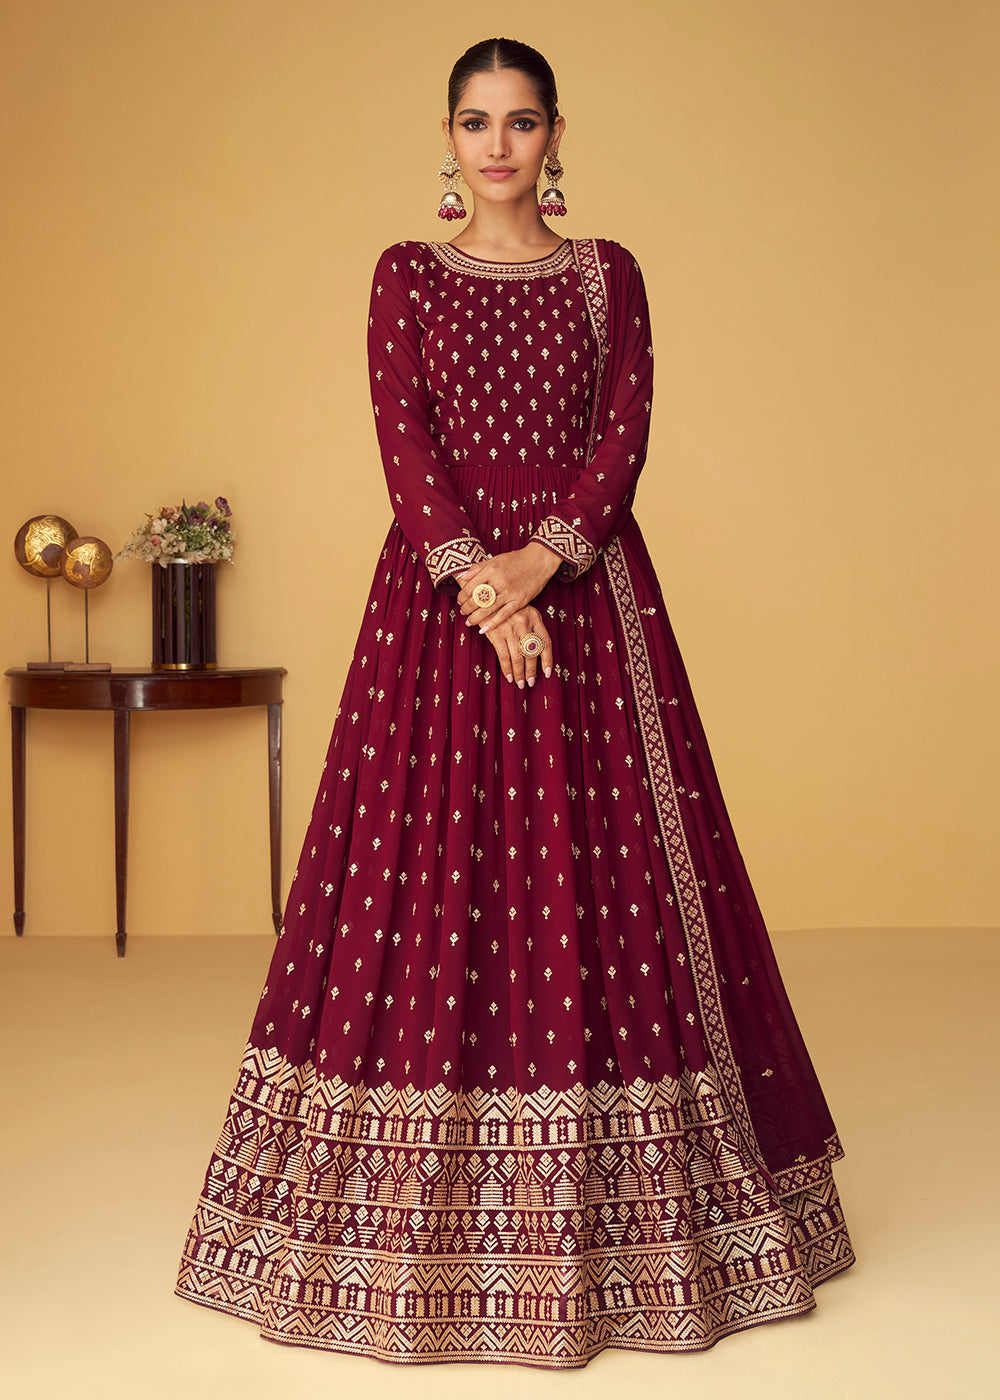 Buy Now Sequins & Thread Real Georgette Maroon Indian Anarkali Suit Online in USA, UK, Australia, New Zealand, Canada & Worldwide at Empress Clothing.